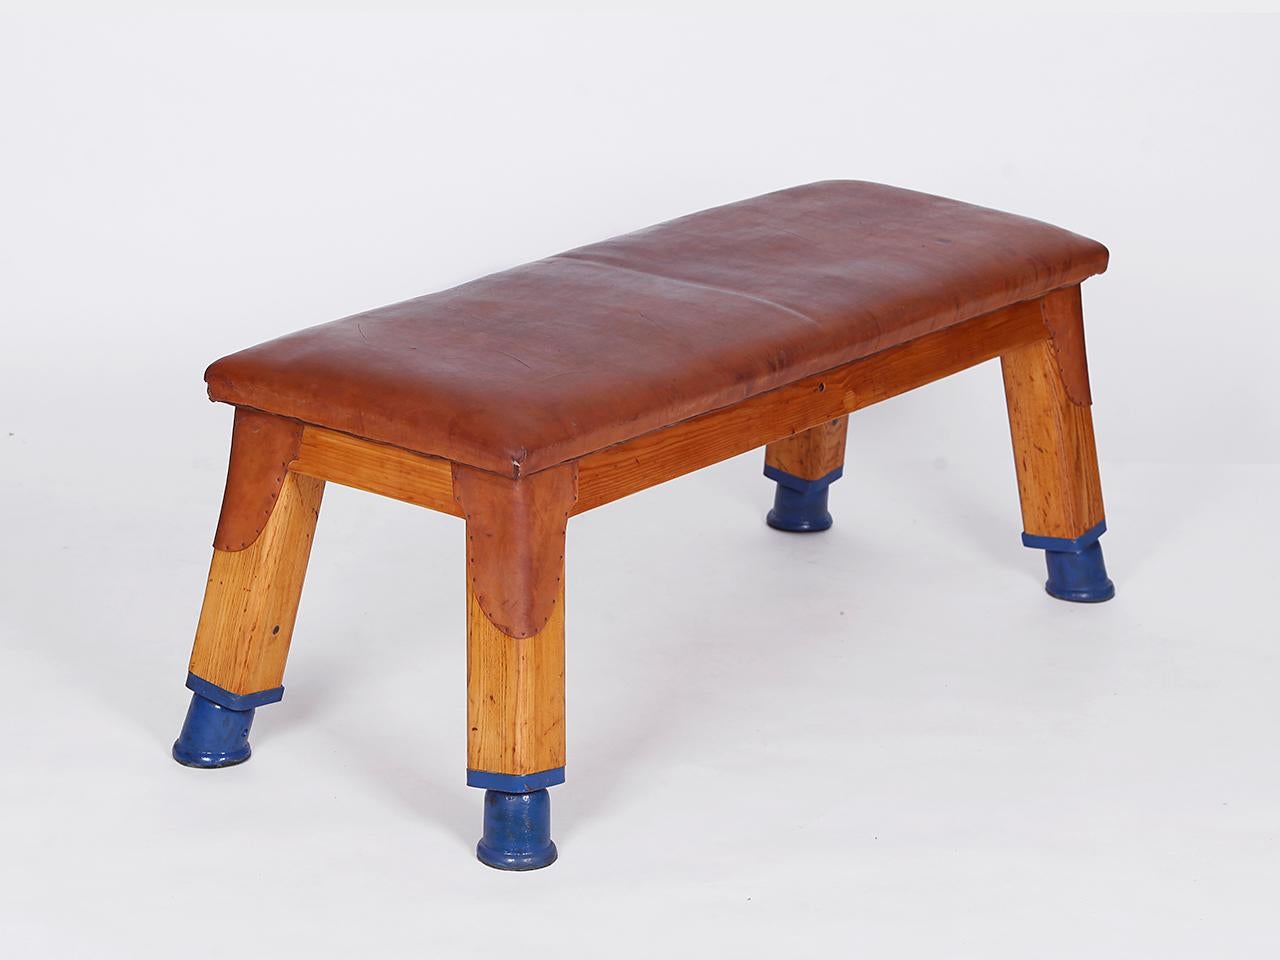 Czech Gymnastic Vintage Leather Pommel Horse Gym Bench Top, 1930s For Sale